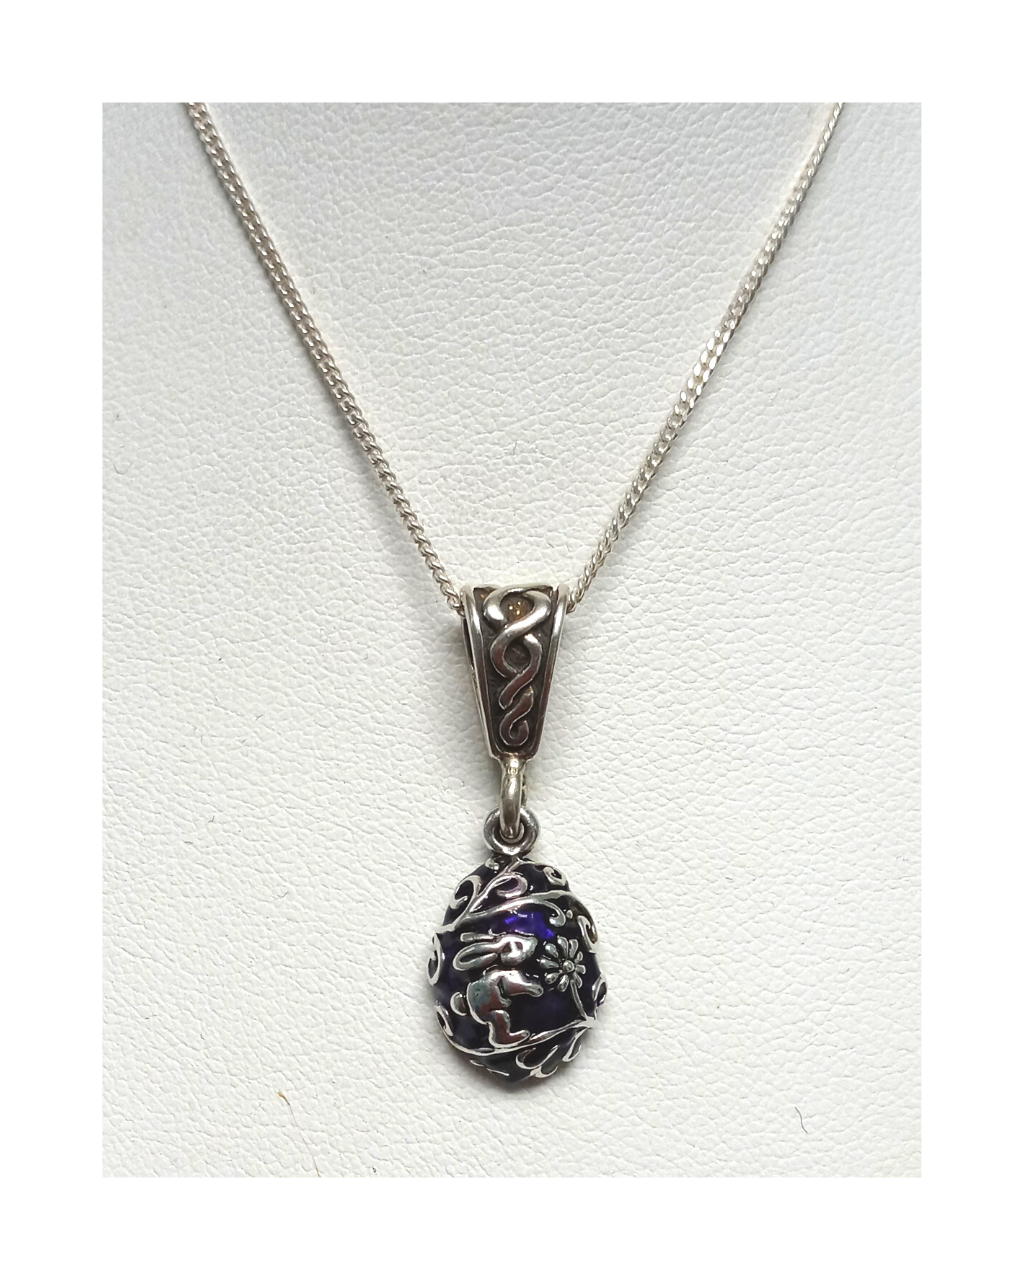 Exclusive Sterling Hand-enameled Purple Easter Egg Design Removable Pendant on 16" Curb Chain